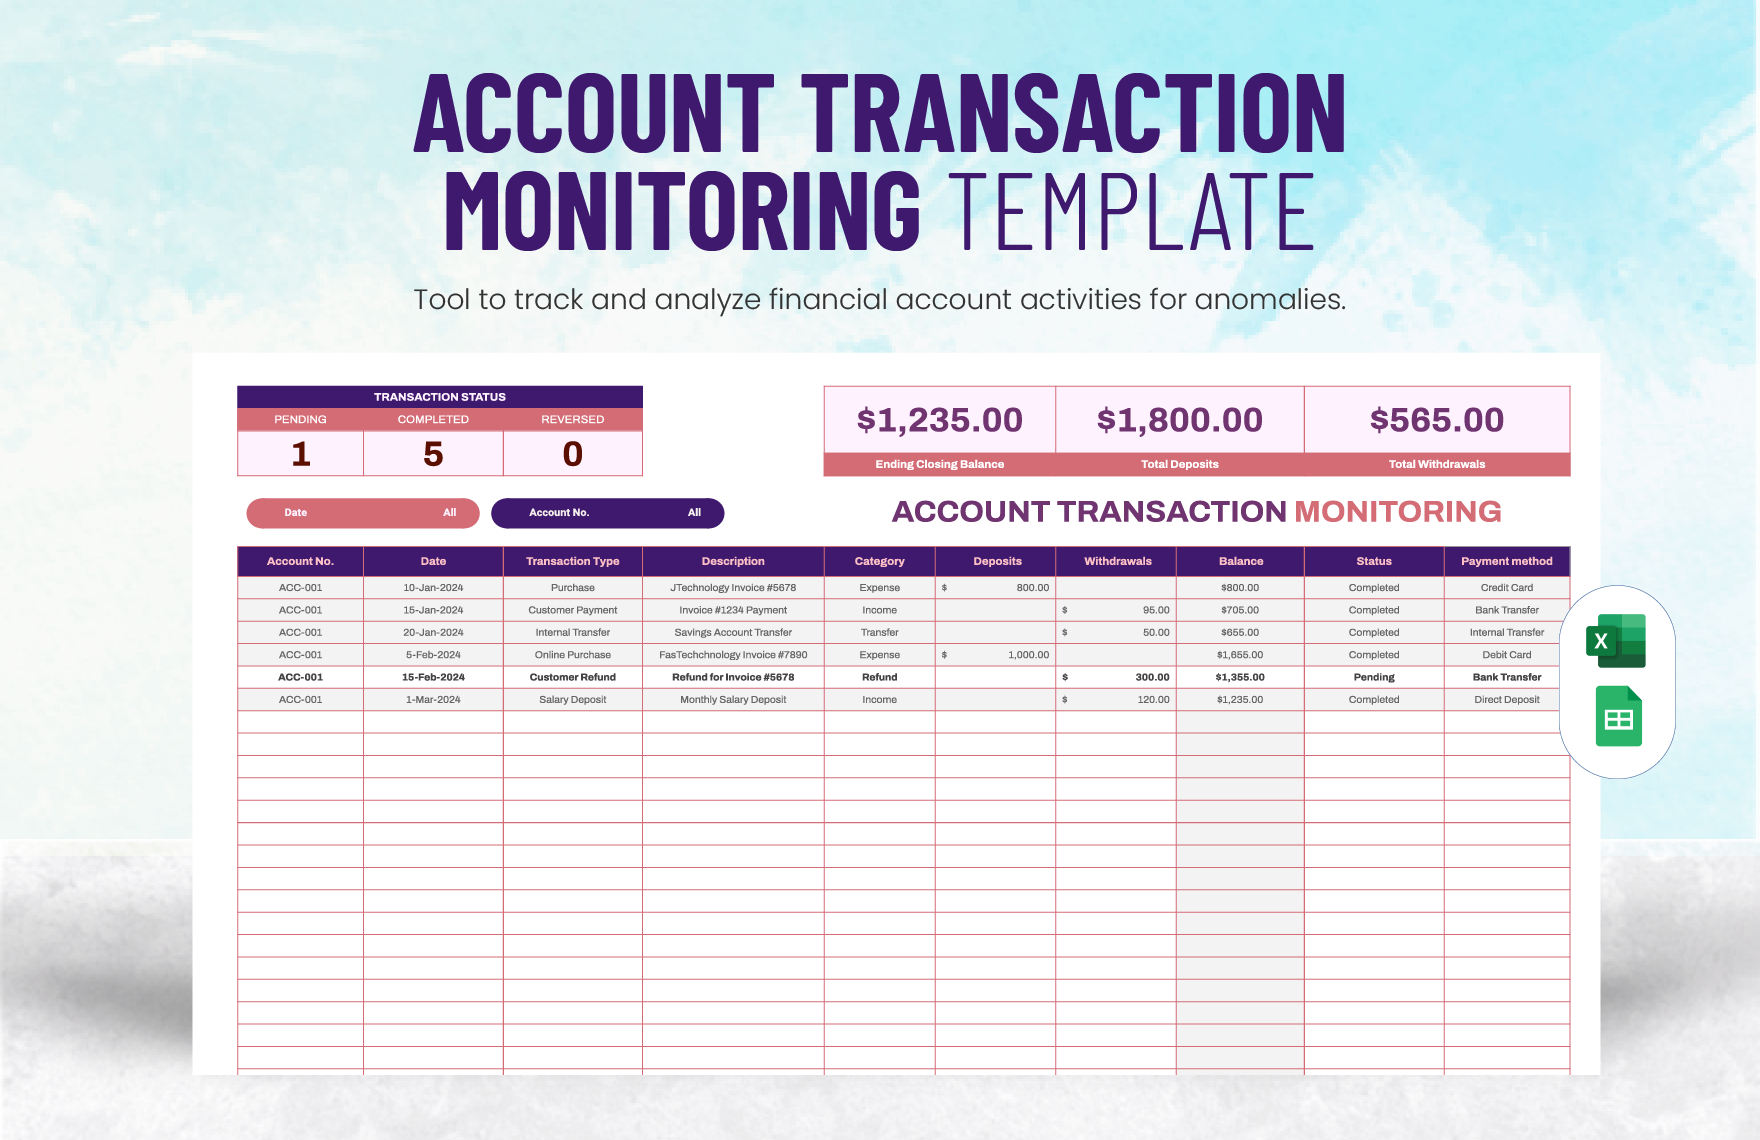 Account Transaction Monitoring Template